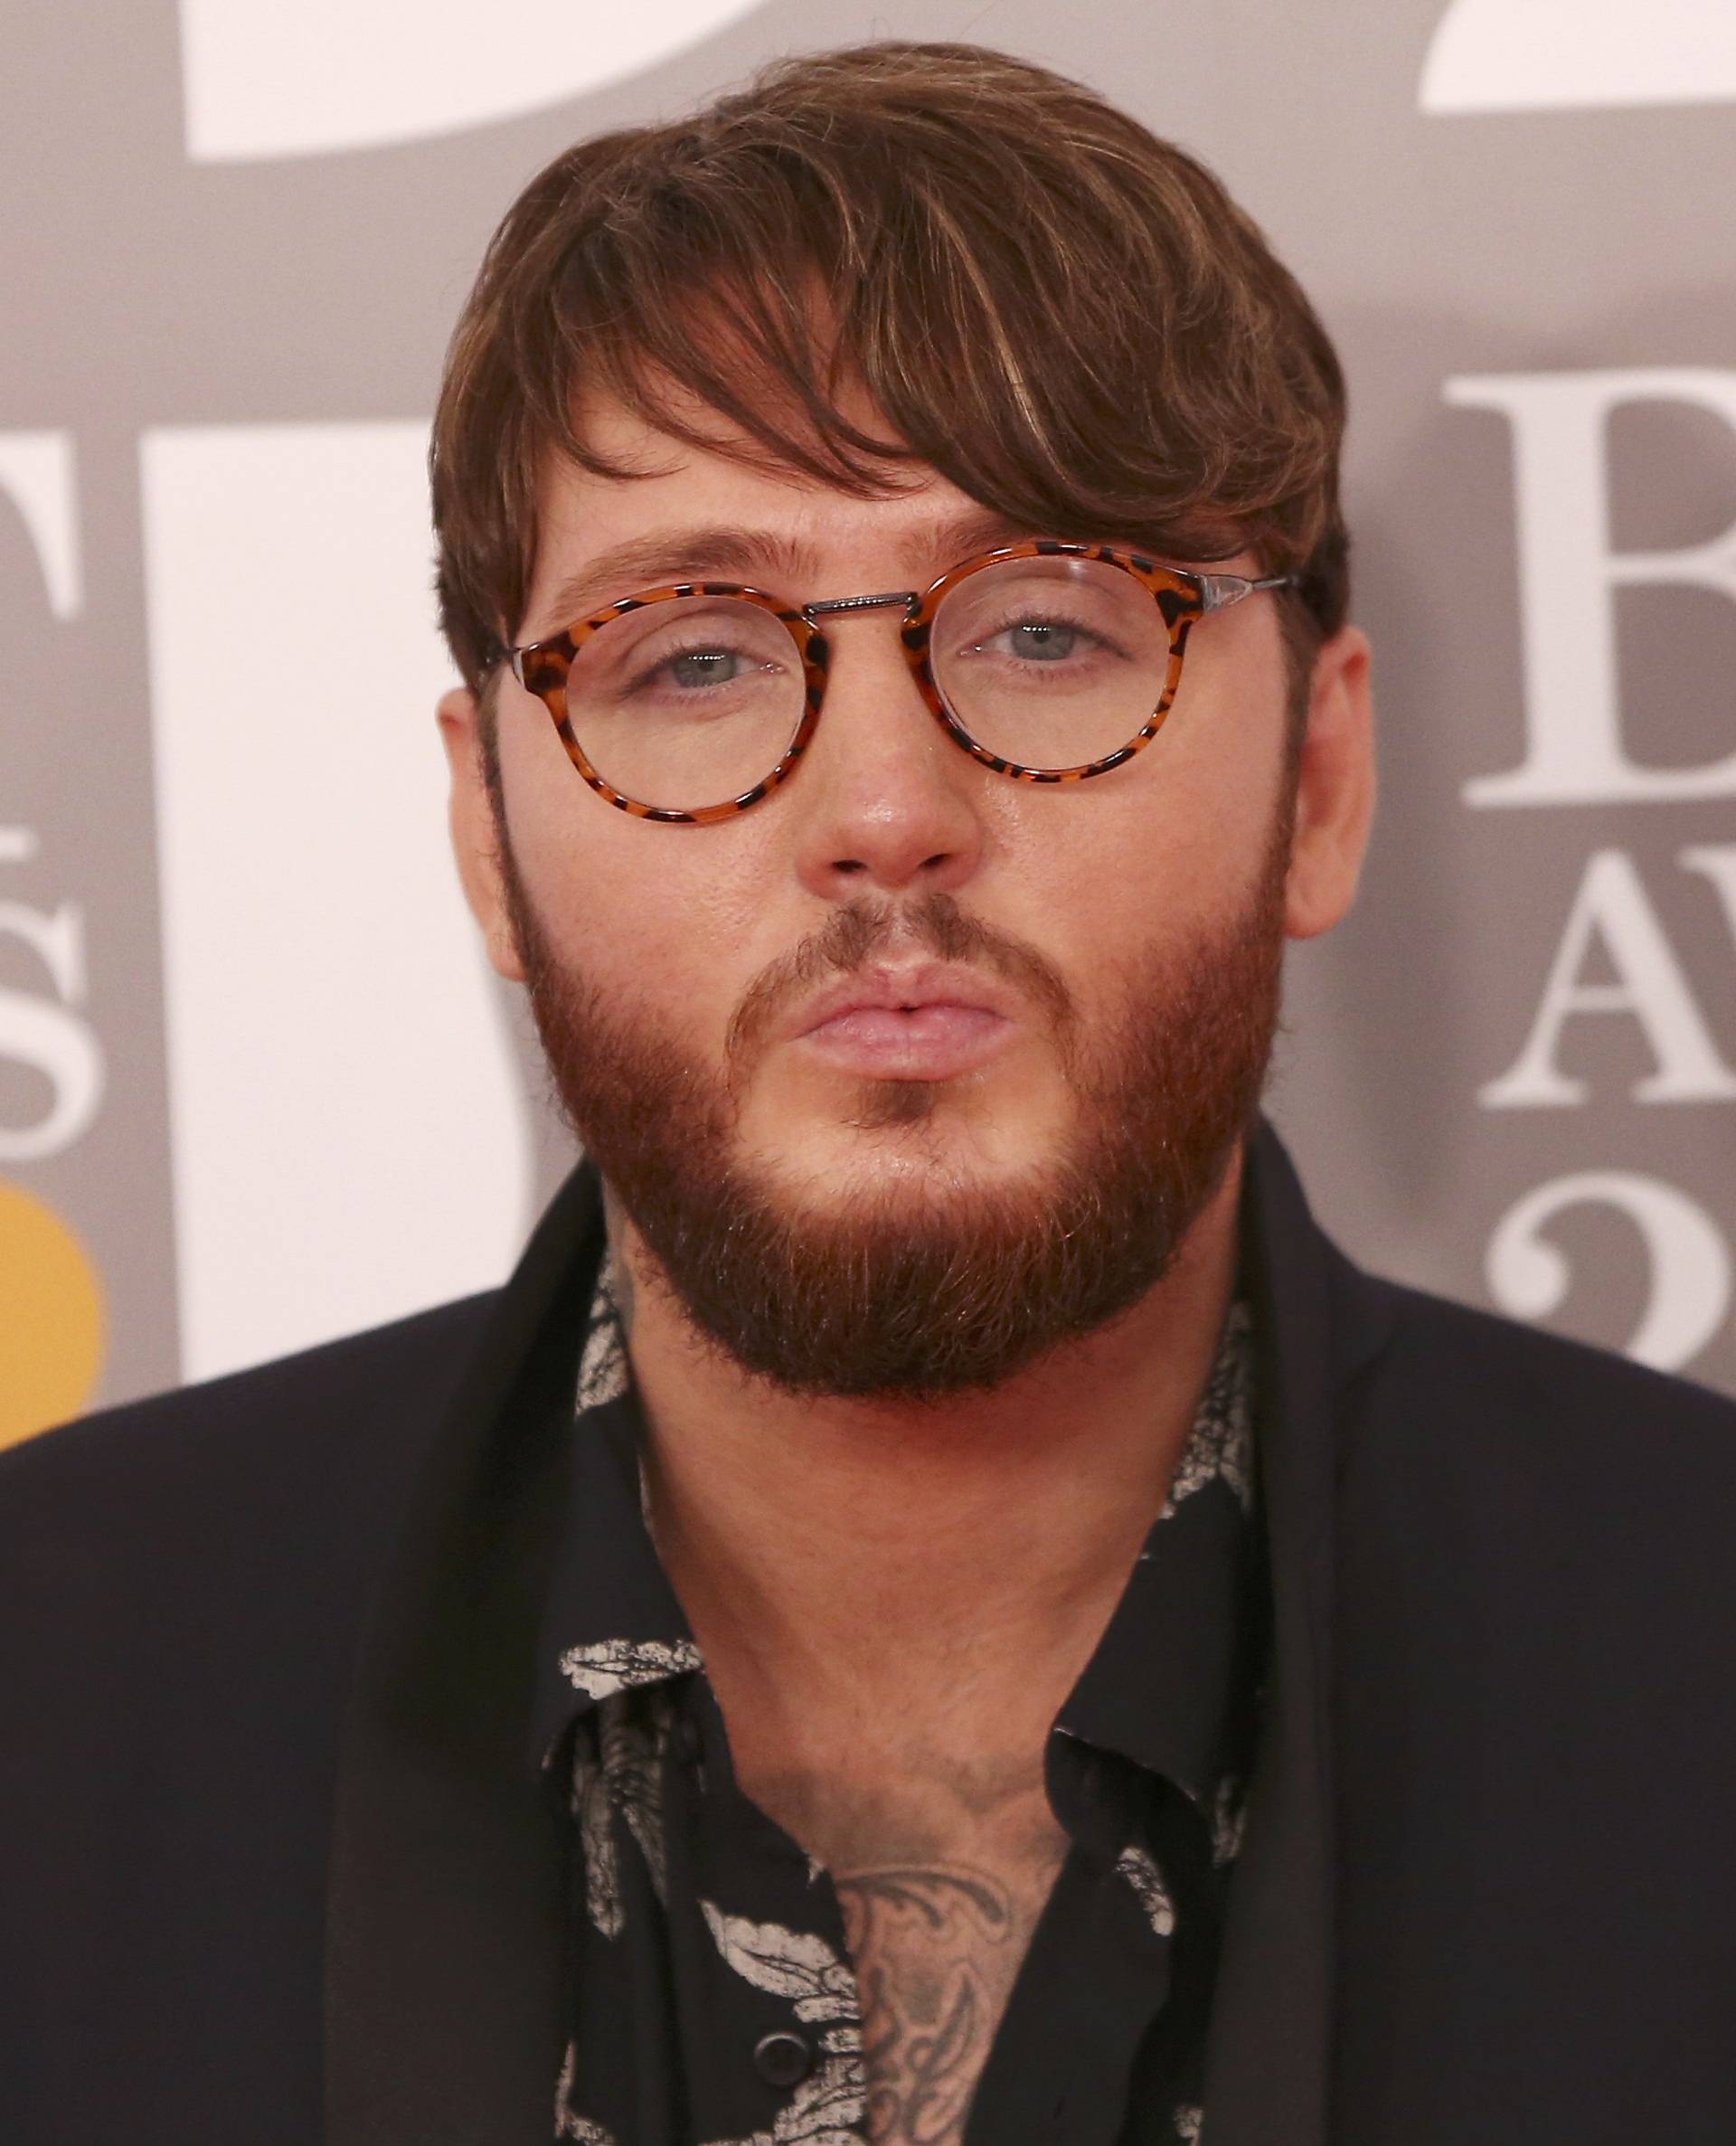 James Arthur arrives for the Brit Awards at the O2 Arena in London,